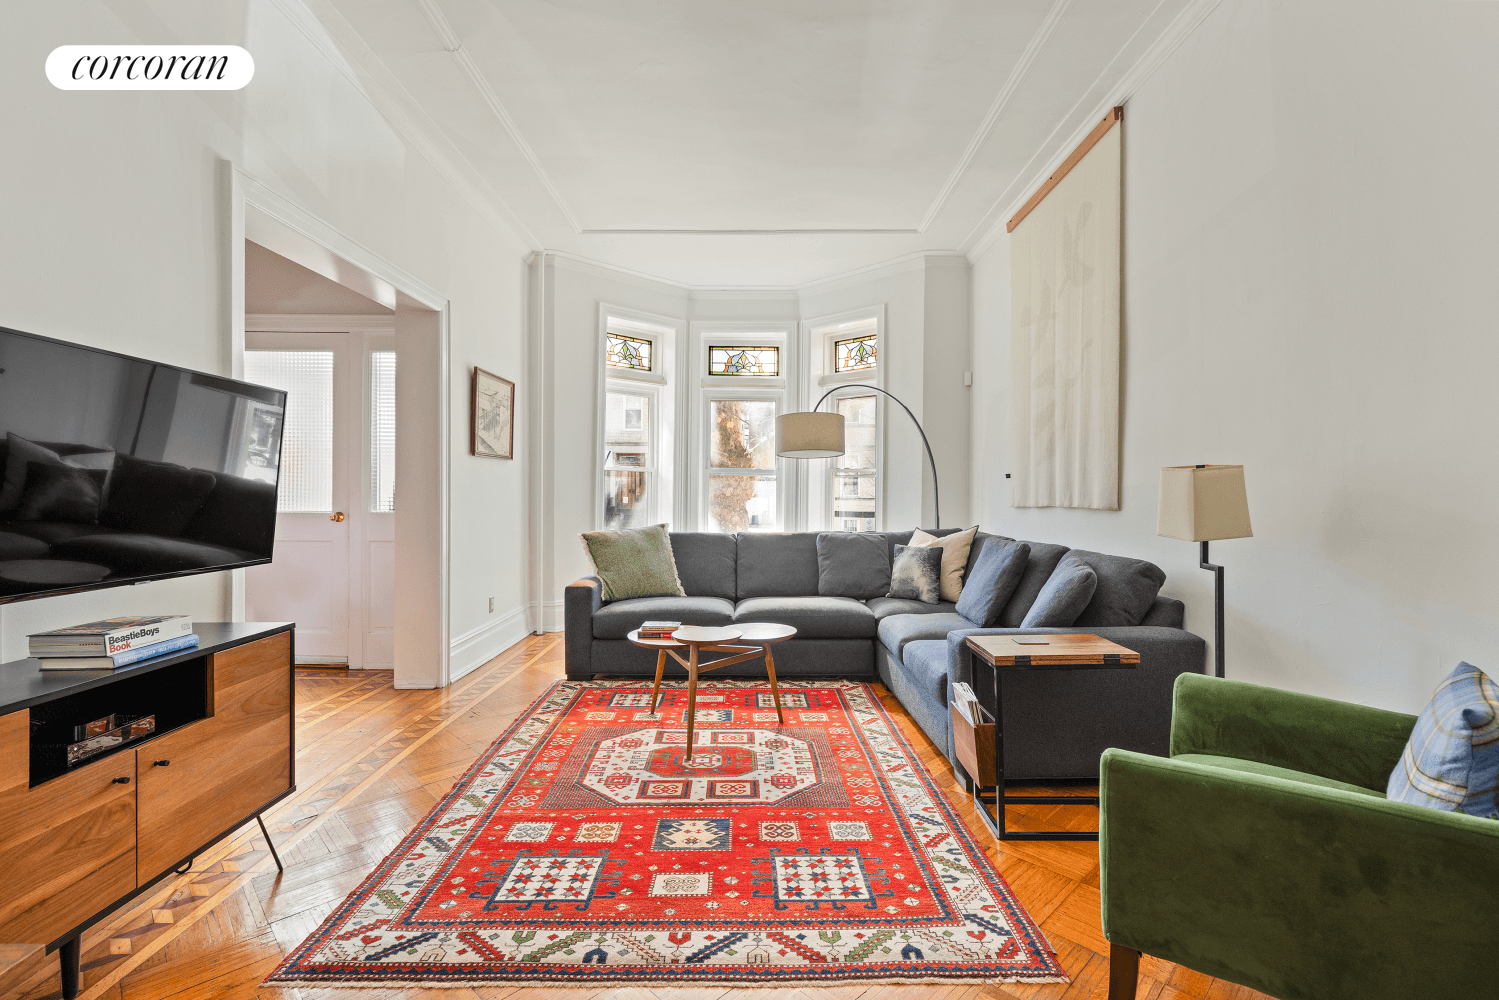 Welcome to 429 81st Street, a classic Brooklyn townhouse nestled in the heart of the vibrant neighborhood of Bay Ridge.